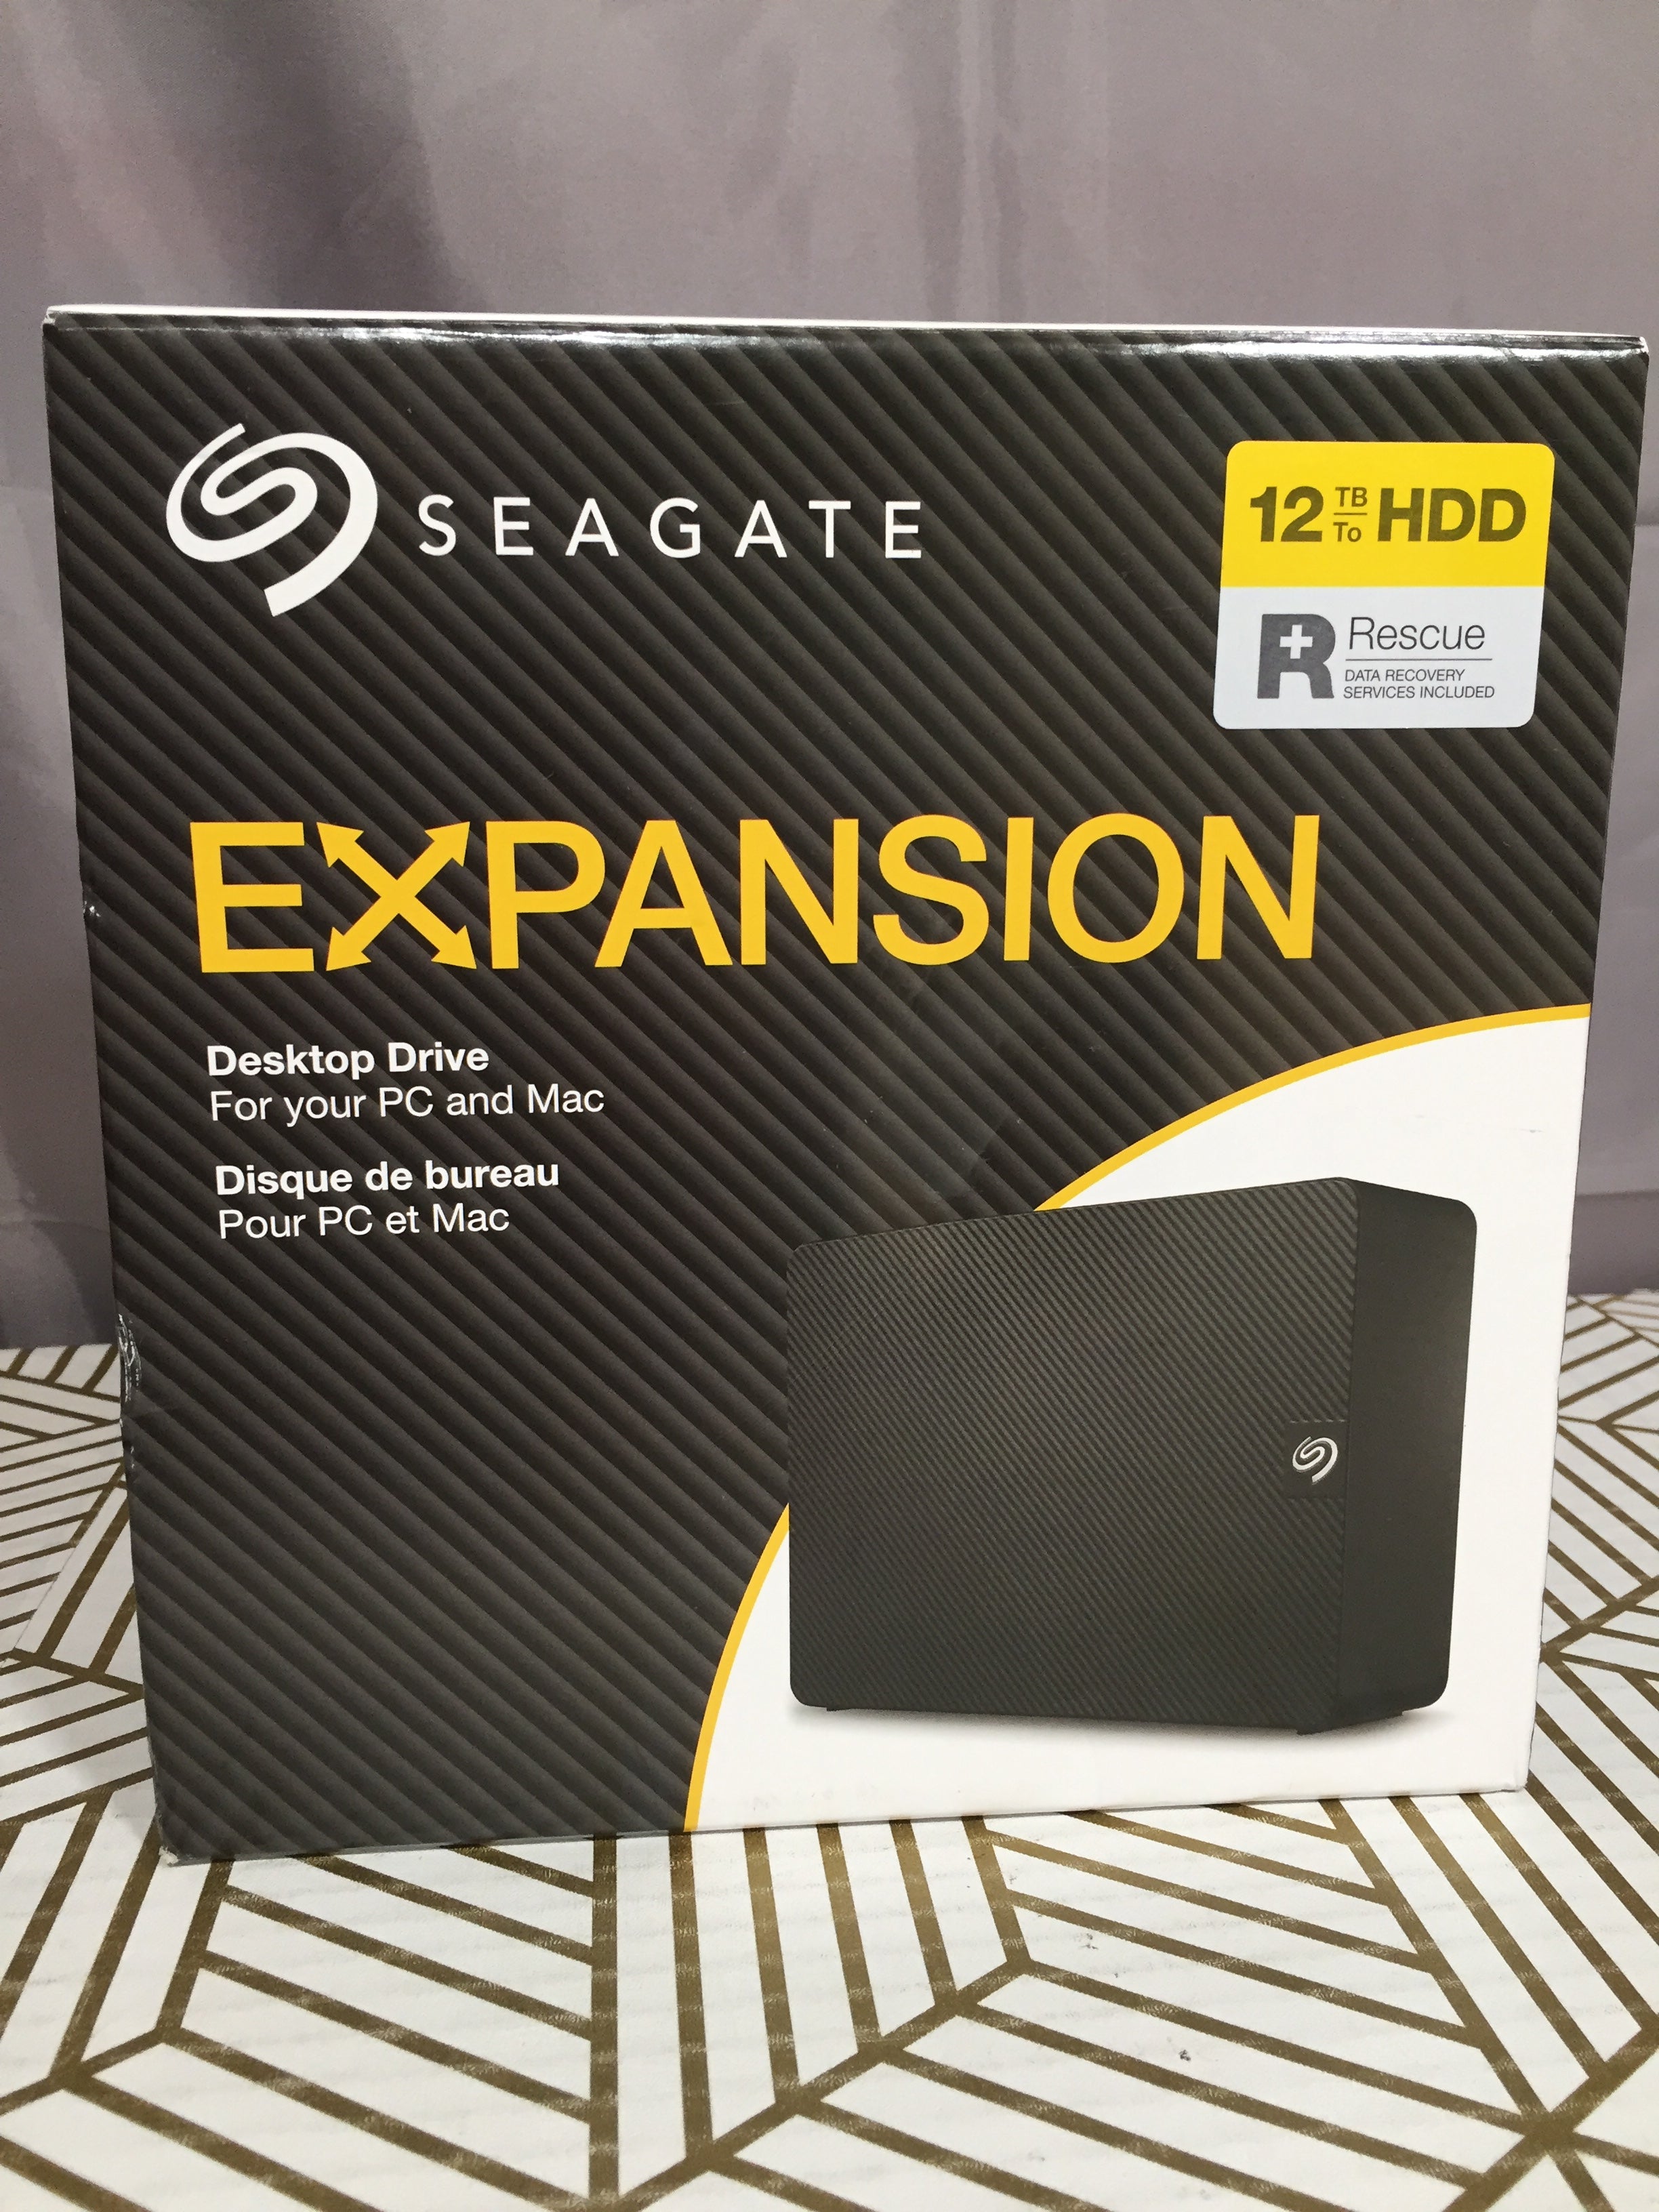 Seagate Expansion 12TB External Hard Drive HDD- Rescue Data Recovery Services *NEW* (8066770338030)